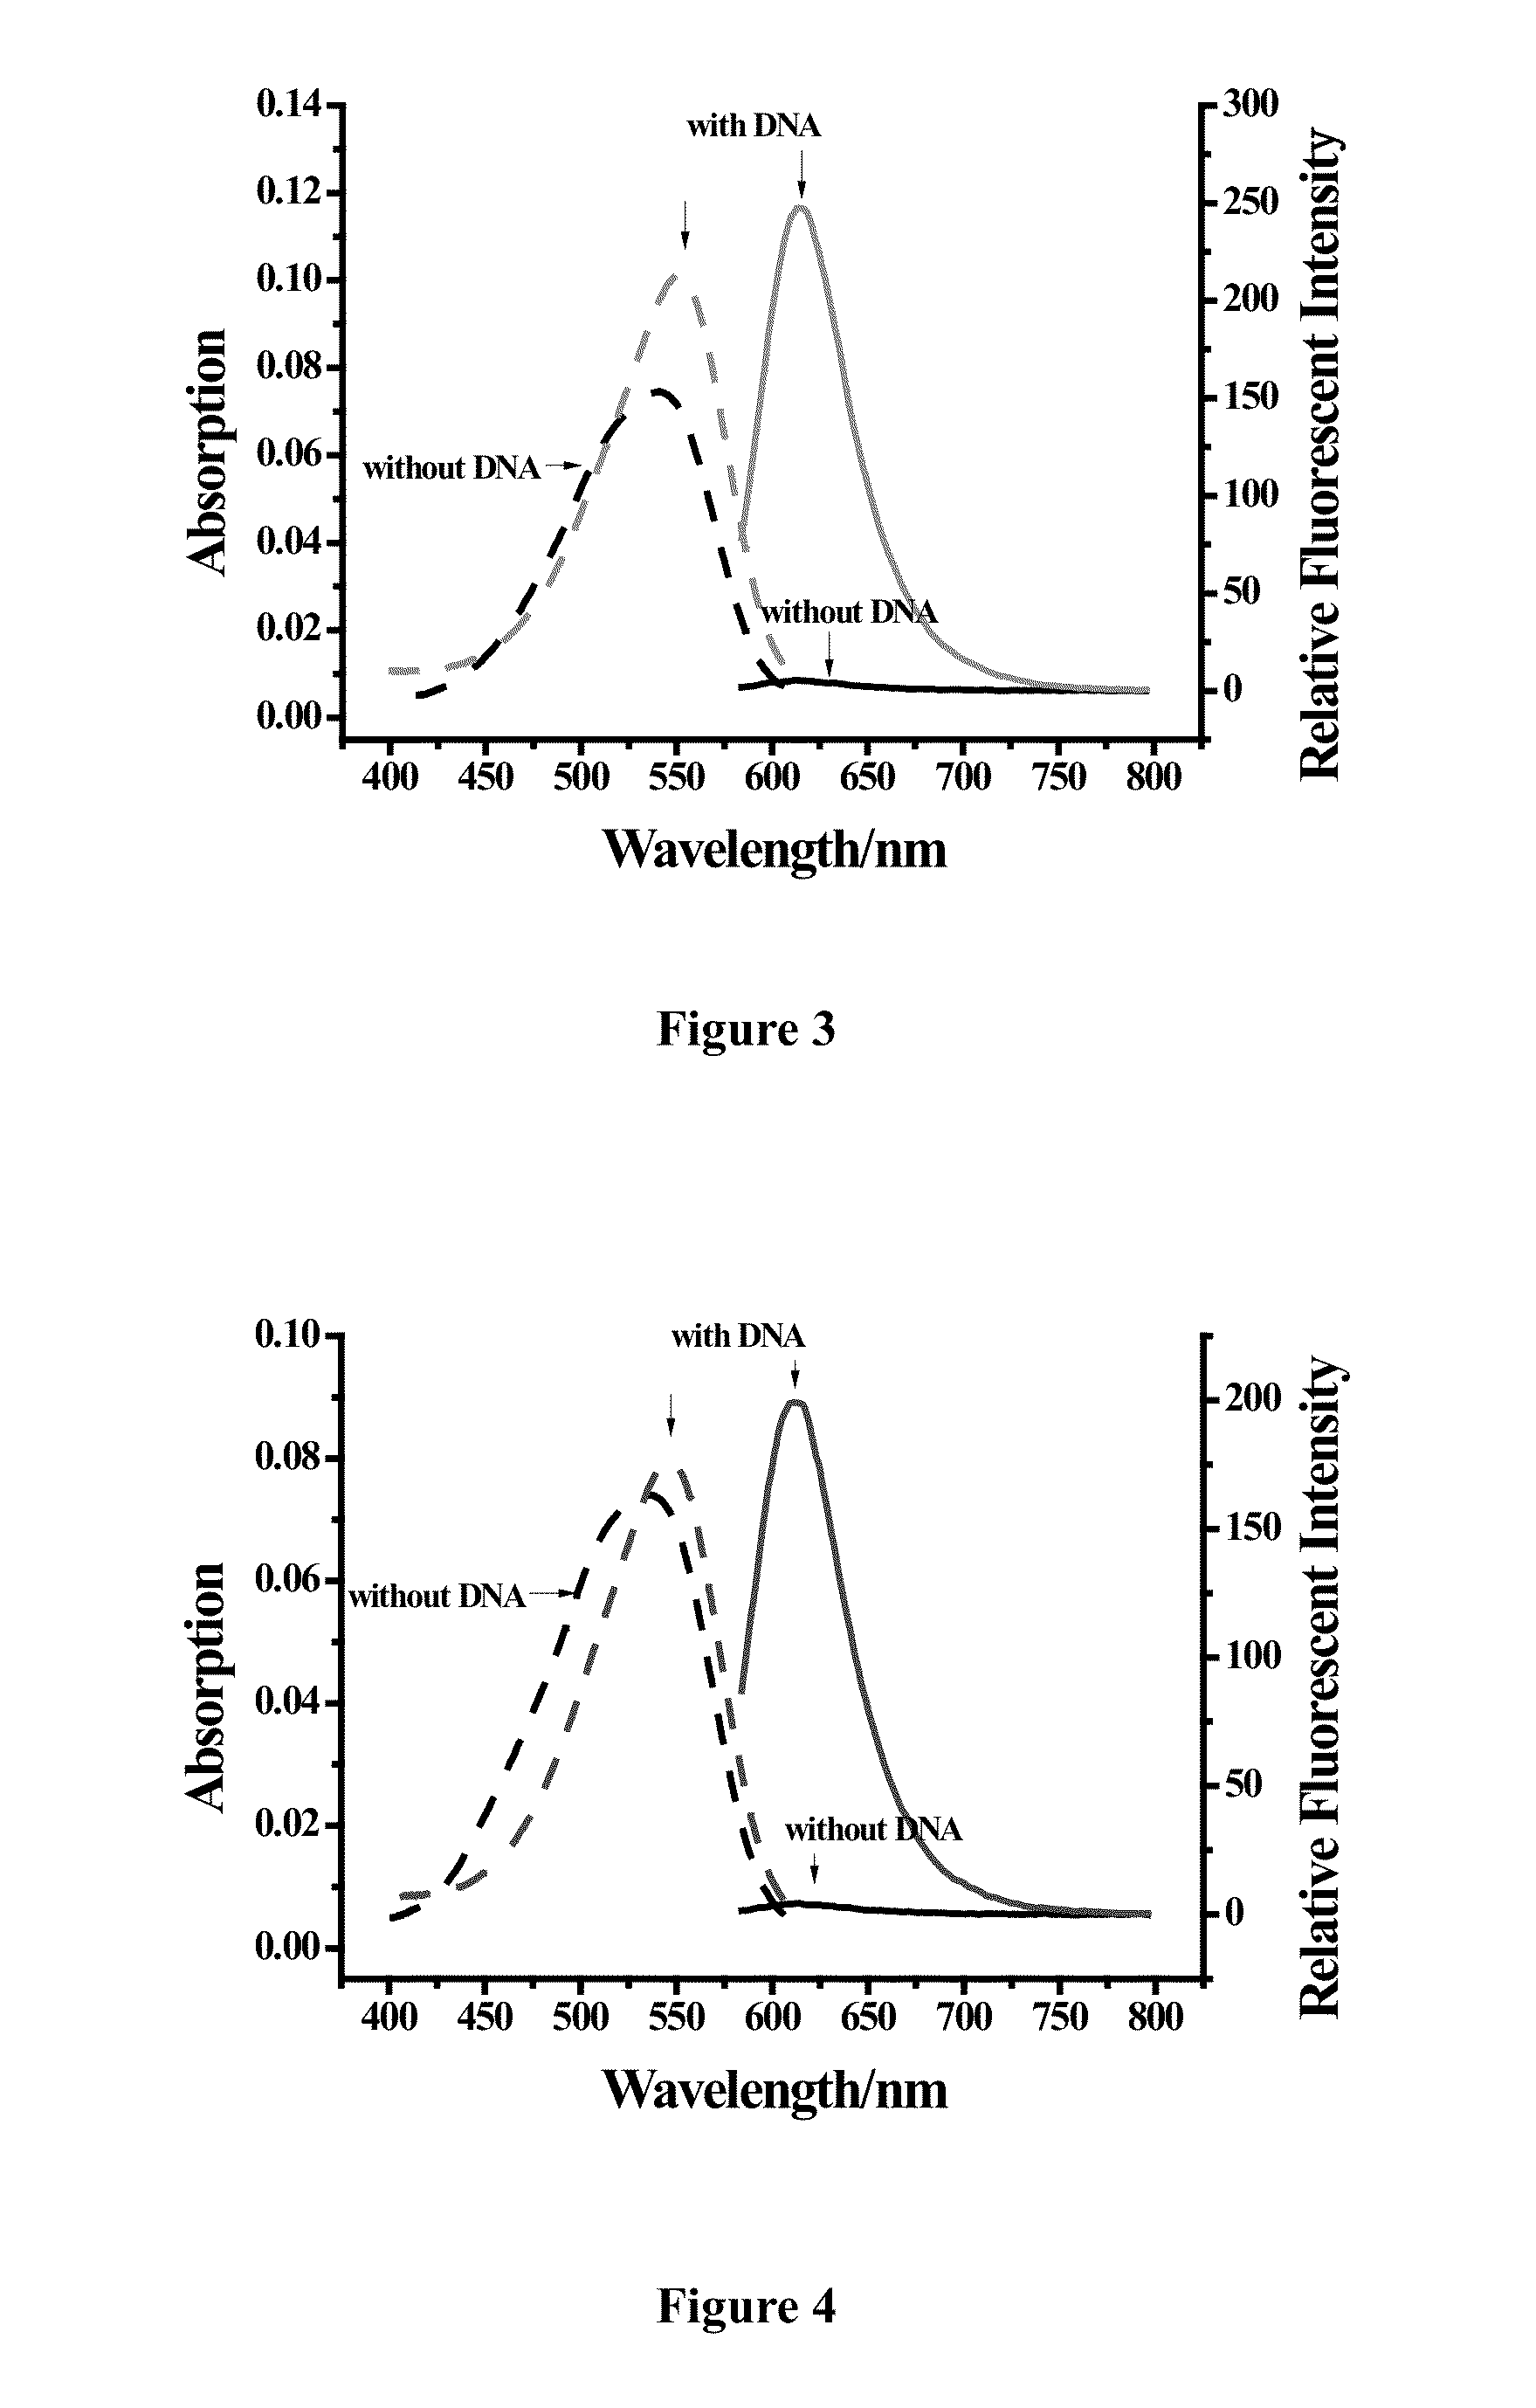 Class of cyano-substituted asymmetric cyanine dyes, synthesizing method and application thereof